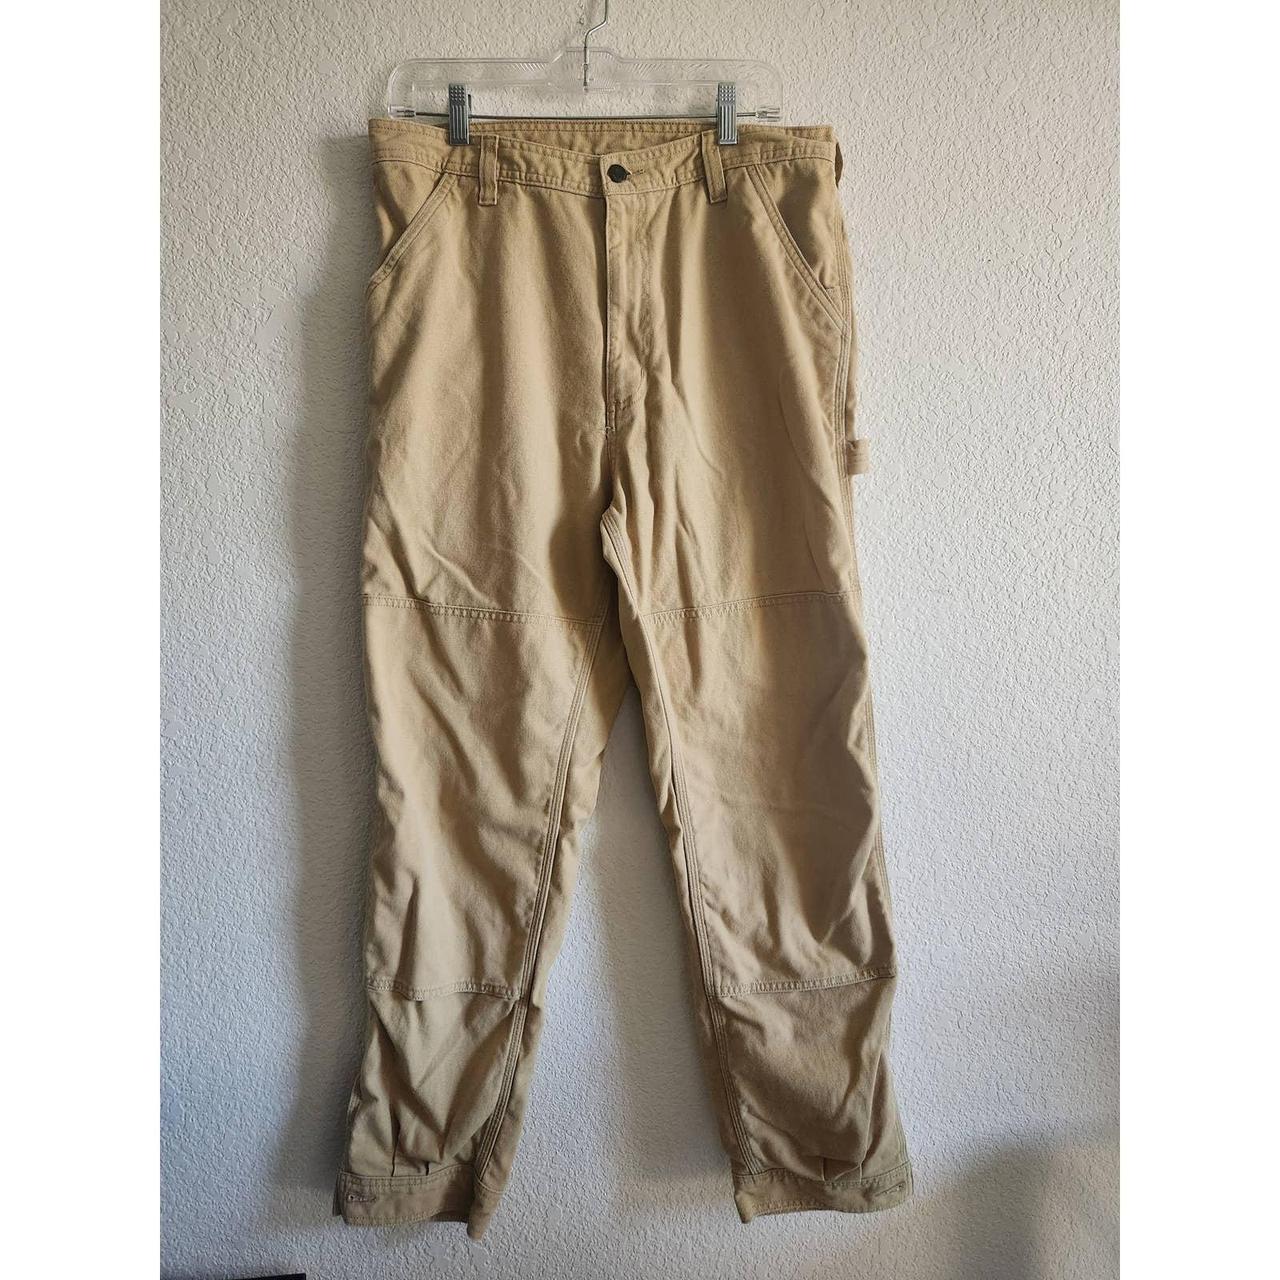 Patagonia Womens Cargo/Work Pants Size 12 Pictures - Depop